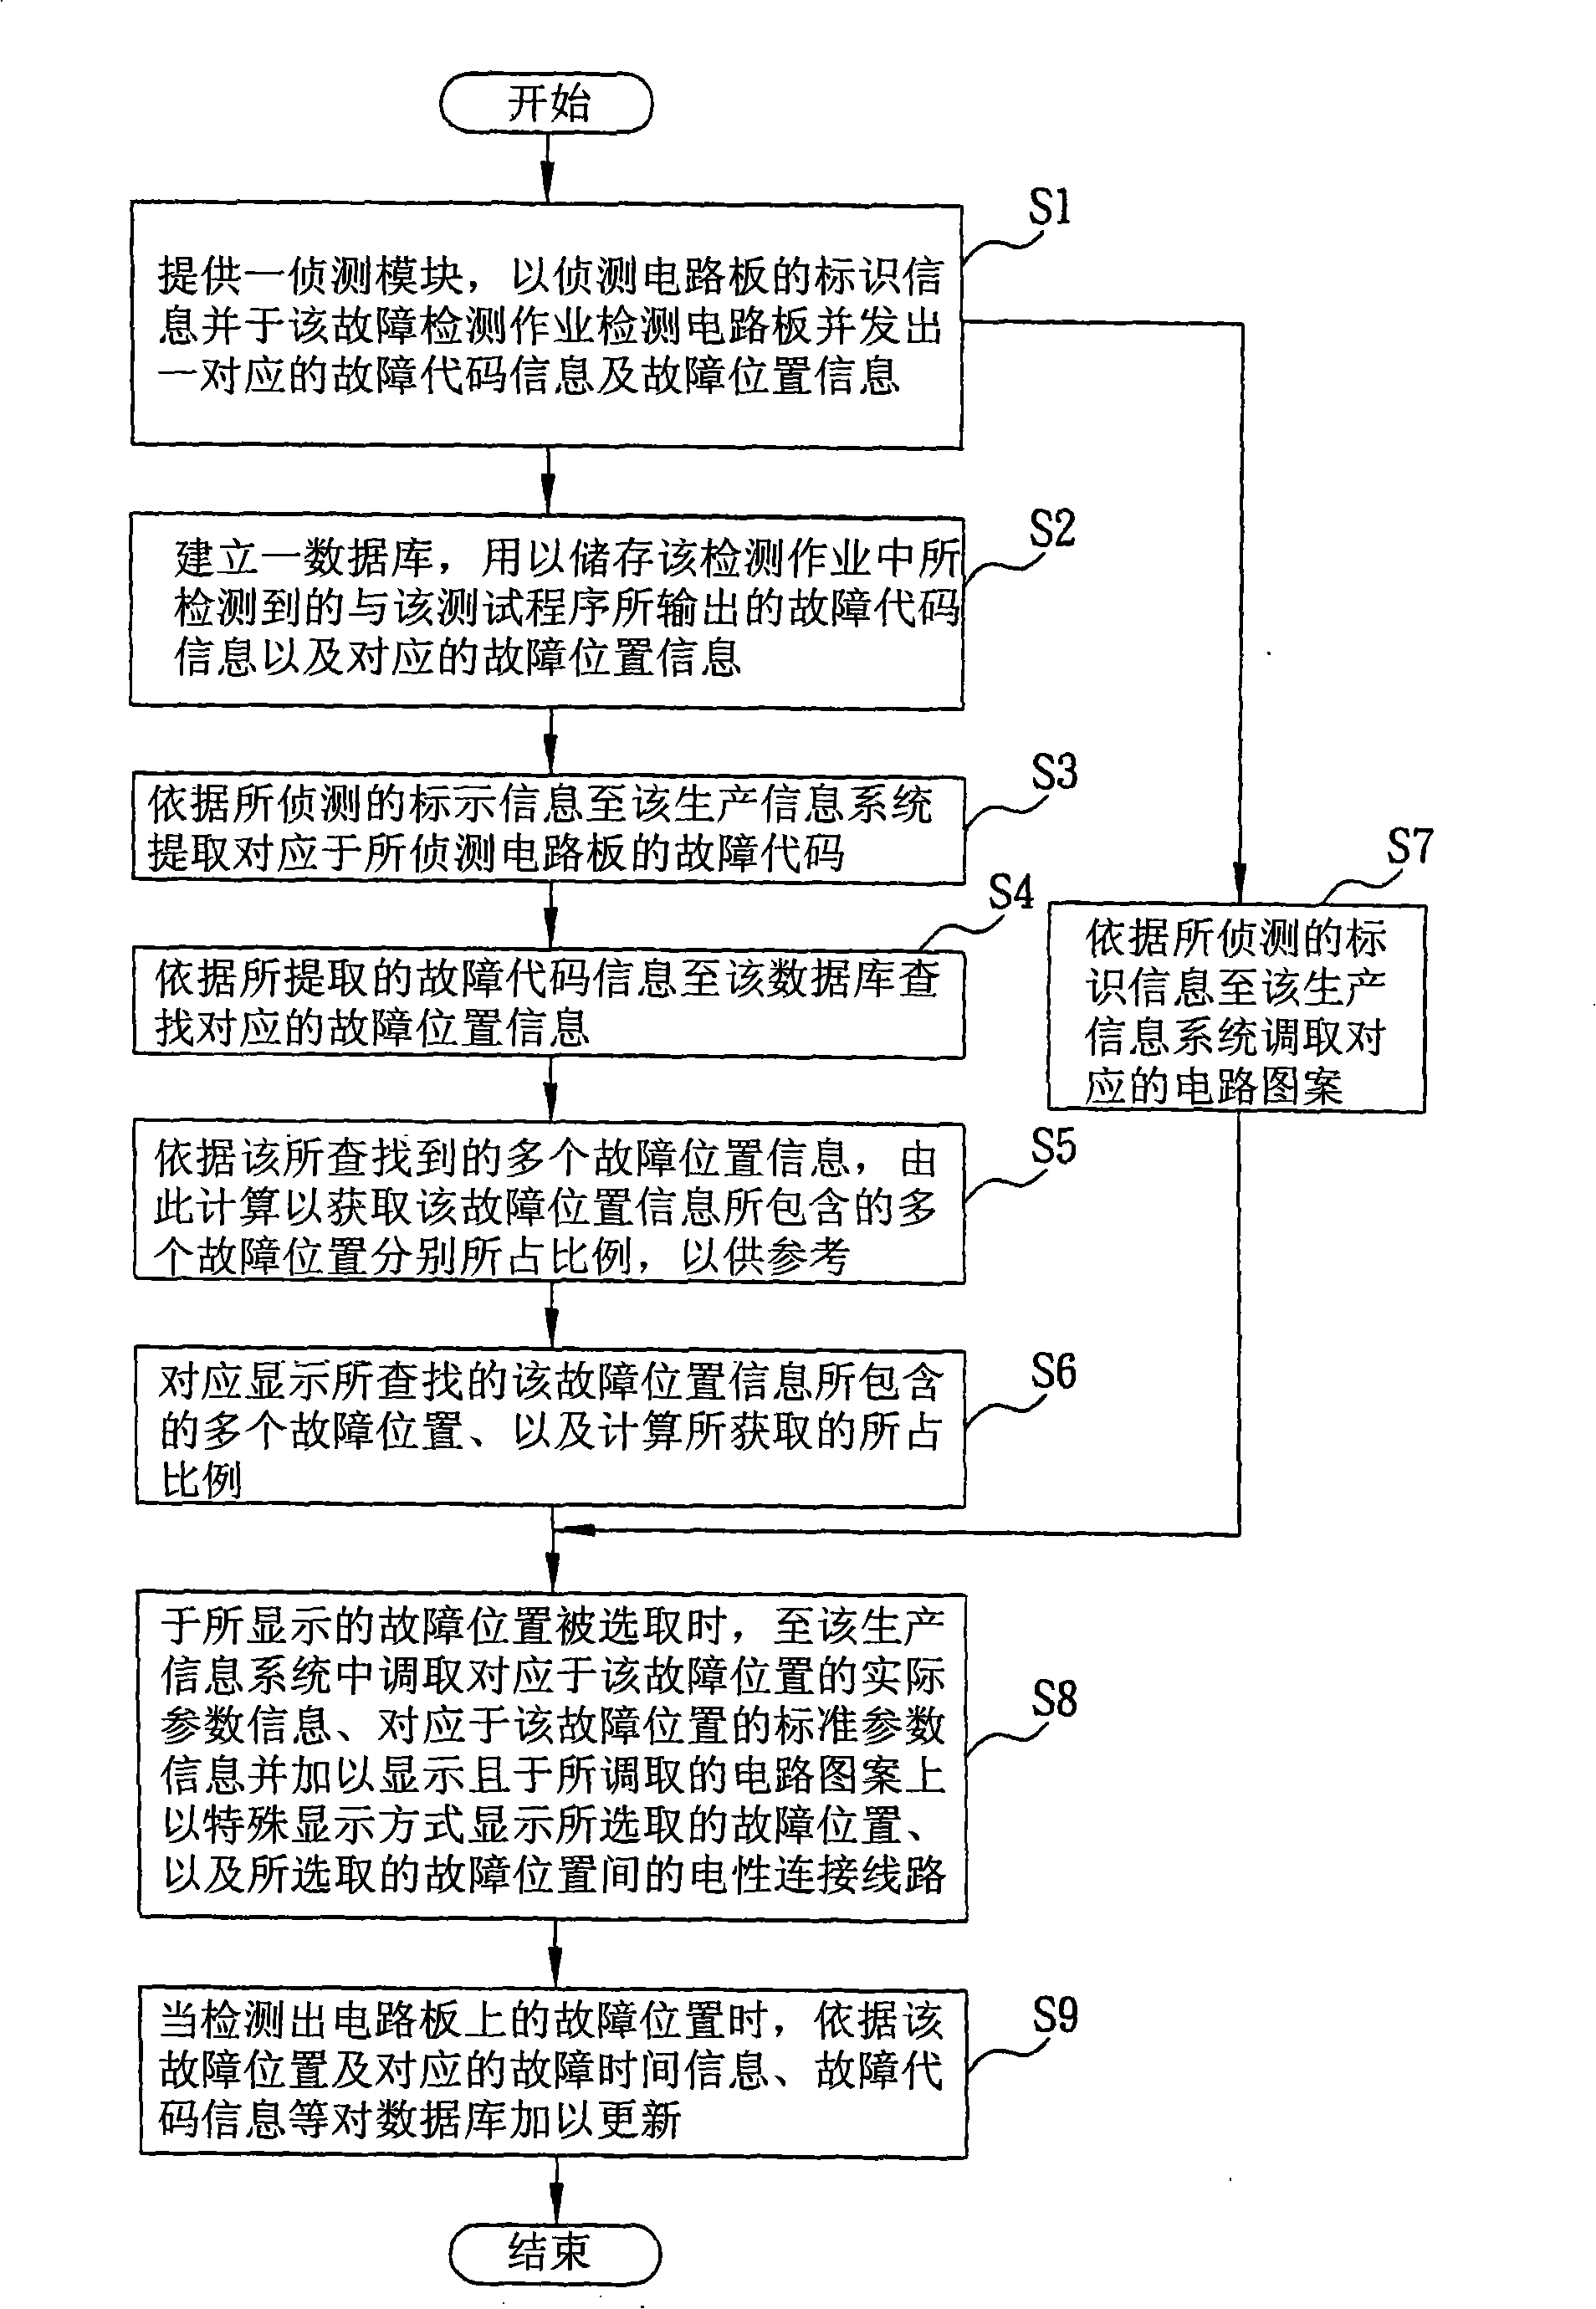 Auxiliary fault detection system and method